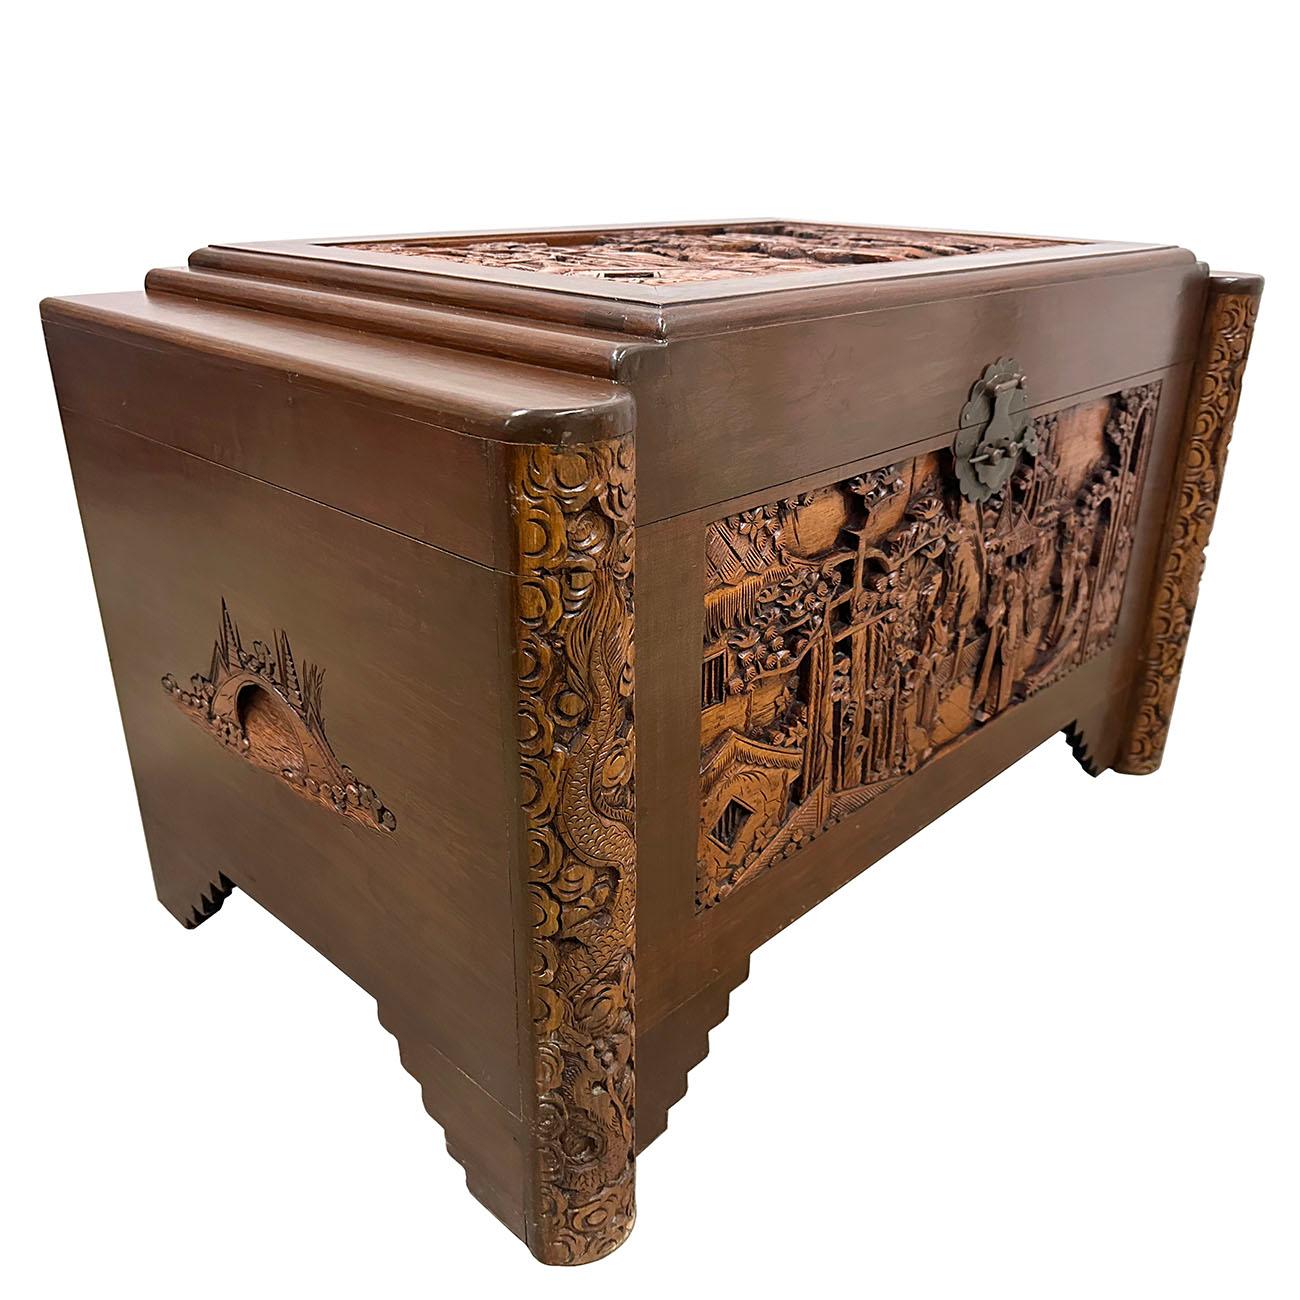 

This is a traditional style of Chinese antique massive carved Camphor chest/trunk from China. It was sailor's hope chest with all the sailor's best wishes and hopes in it. This chest has detailed carving works of Dragons on the front corner and